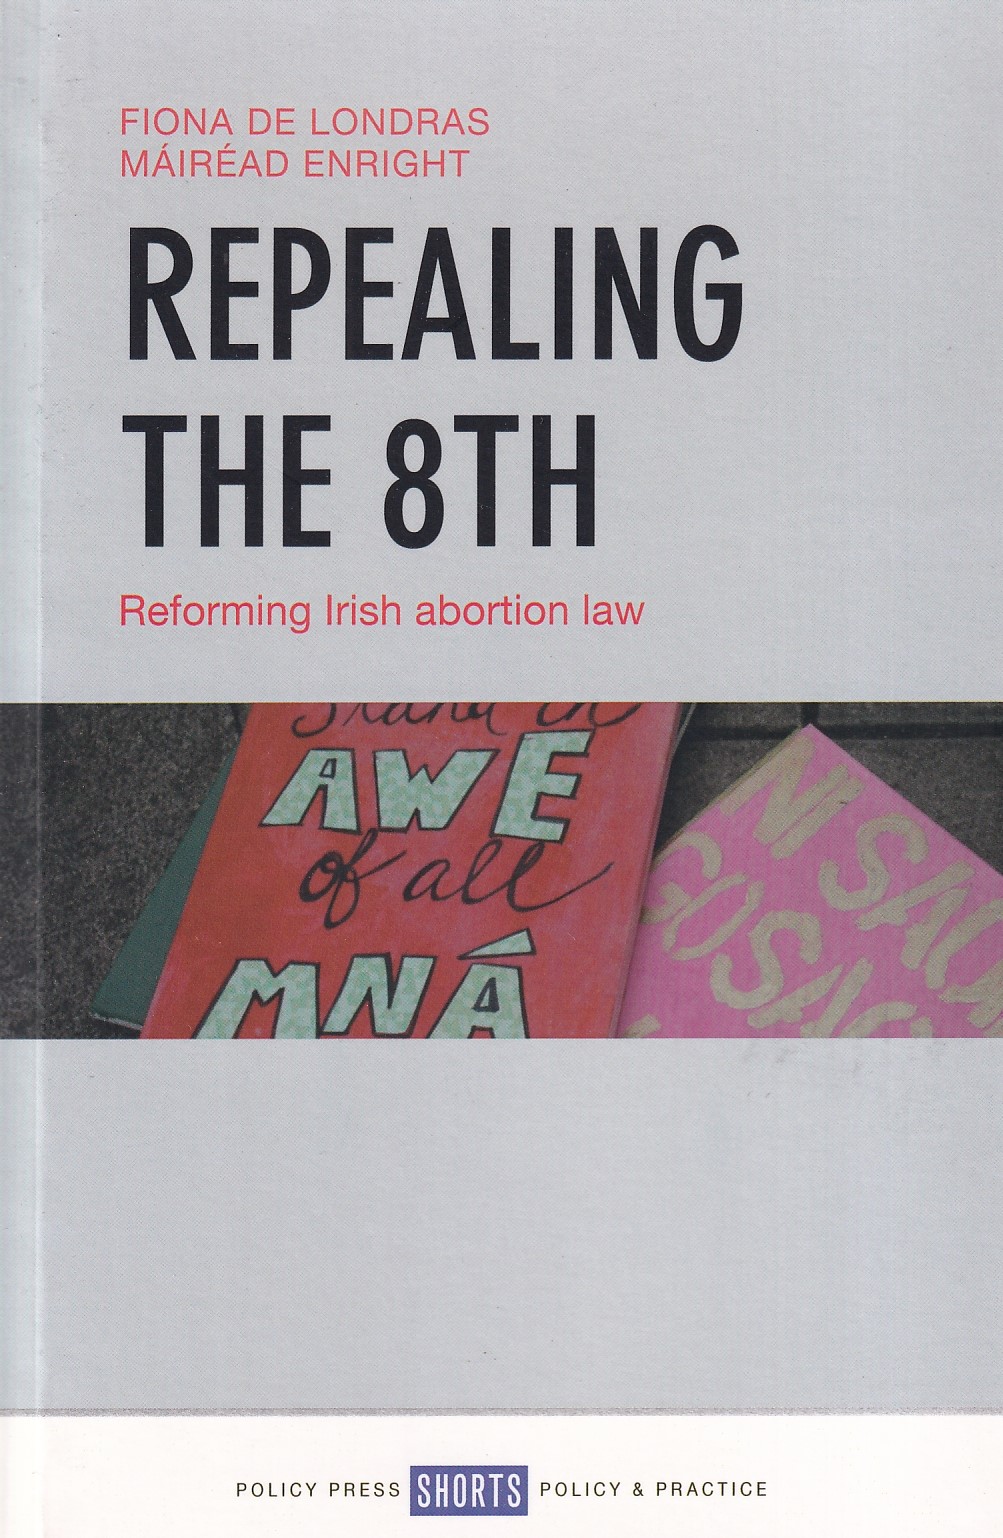 Repealing The 8th: Reforming Irish Abortion Law by Fiona de Londras & Máiréad Enright